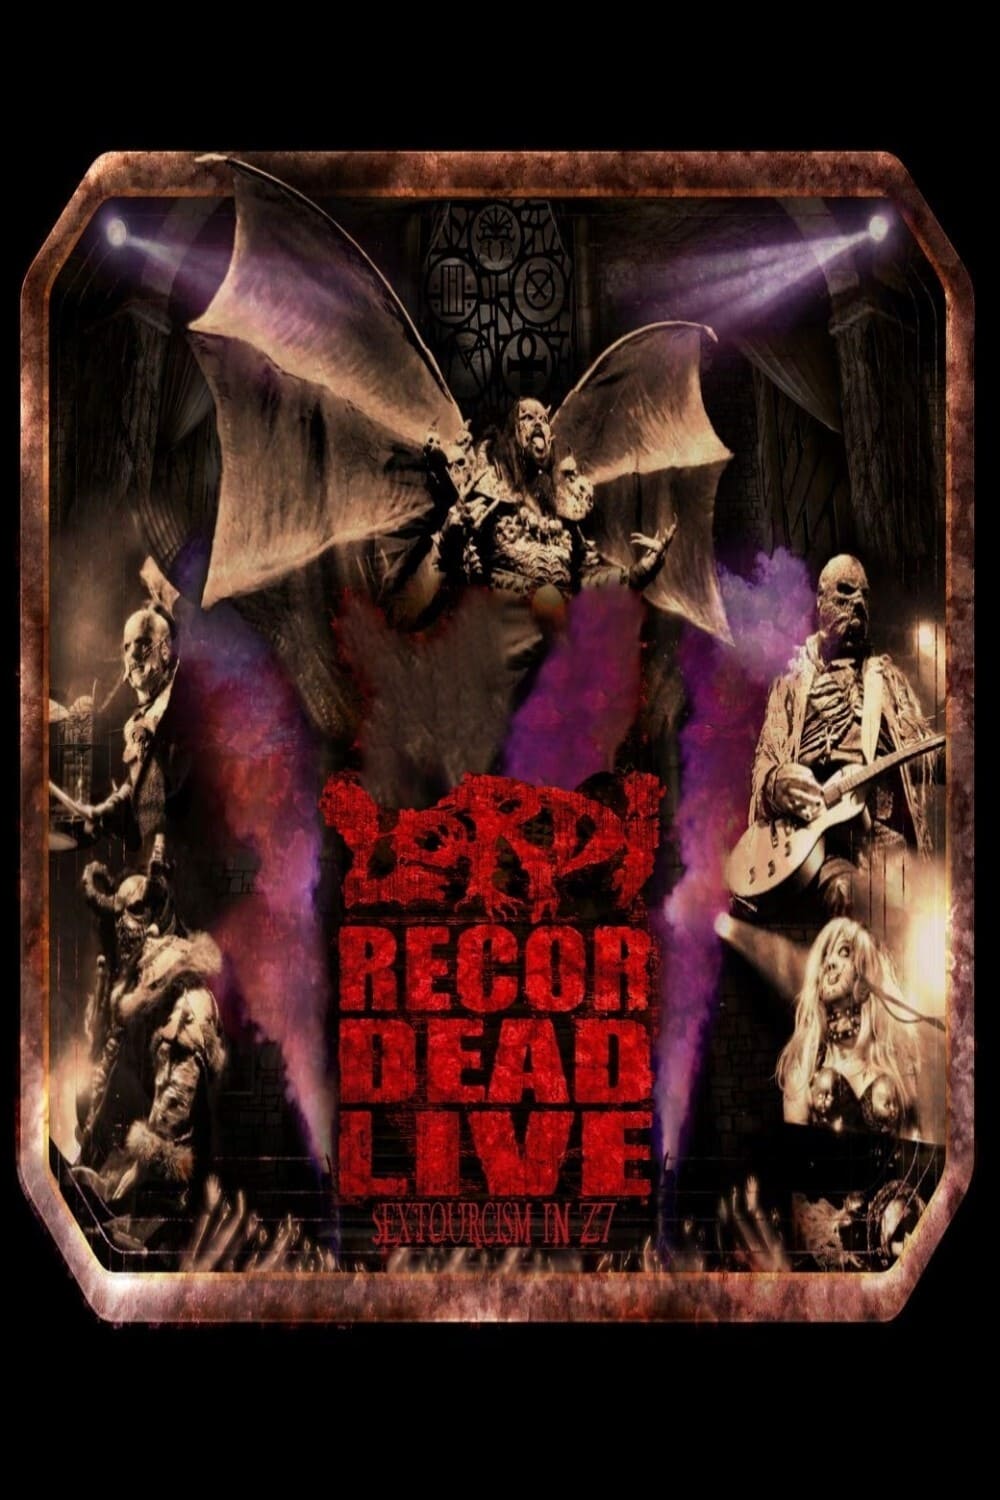 Lordi ‎- Recordead Live - Sextourcism In Z7